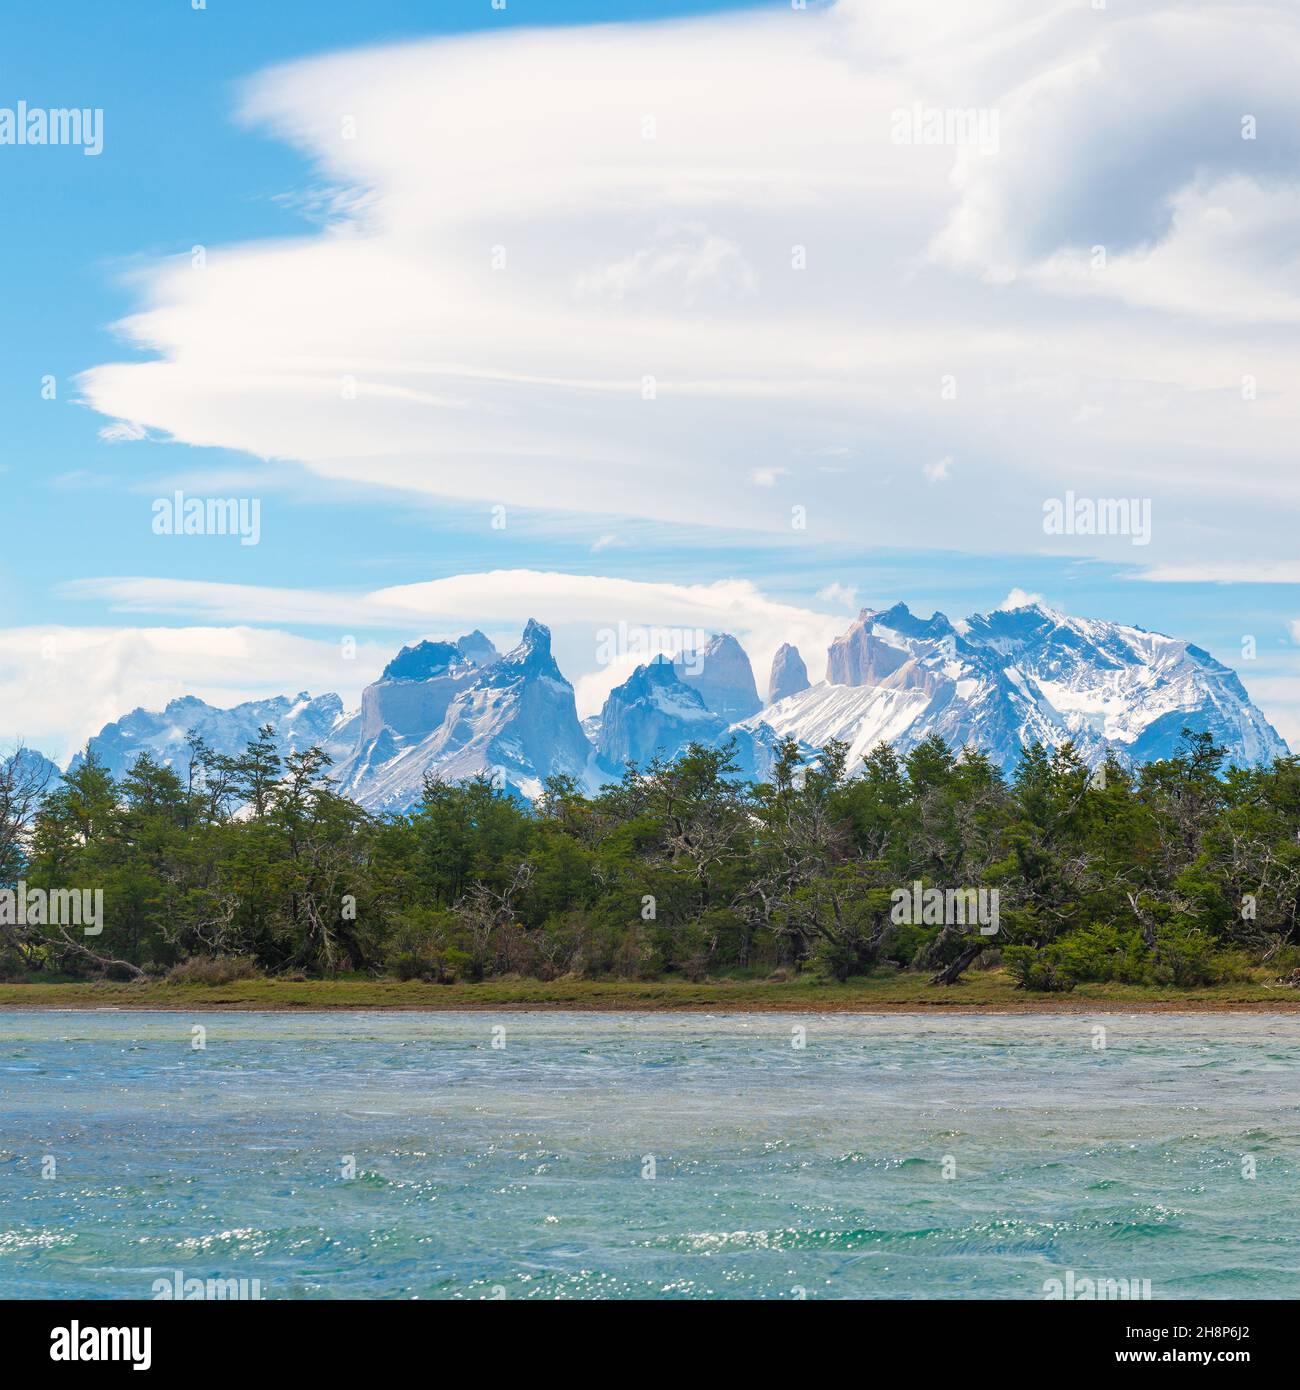 Andes mountain peaks of the Cuernos and Torres del Paine by the Serrano river, Torres del Paine national park, Patagonia, Chile. Stock Photo